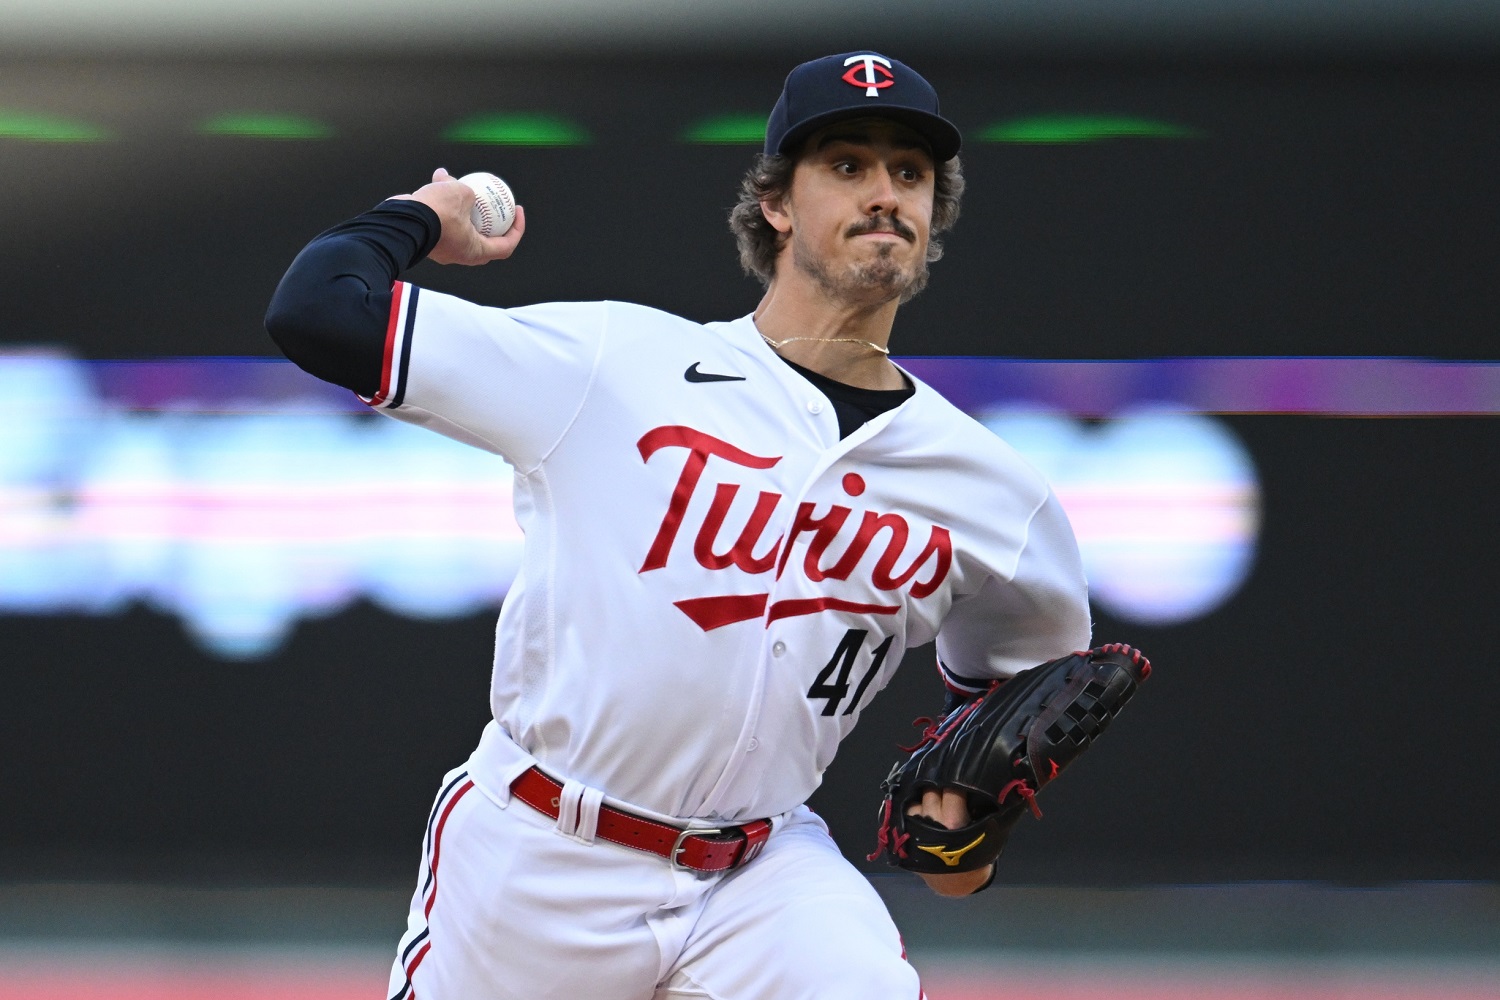 Jhoan Duran threw heat all year so of course he won Twins Pitcher